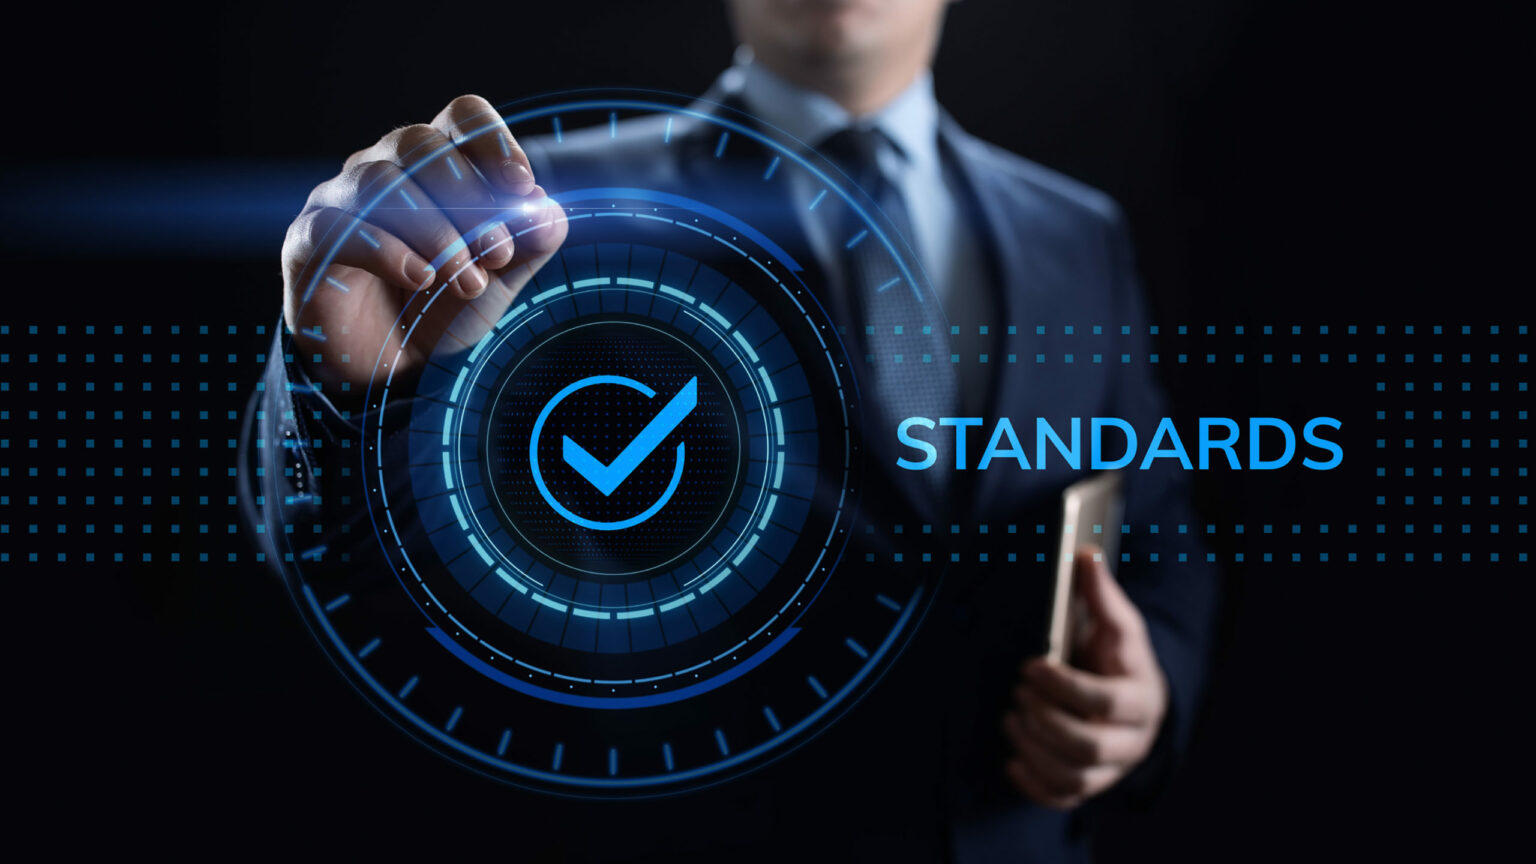 Standards quality Assurance control standardisation and certification concept.